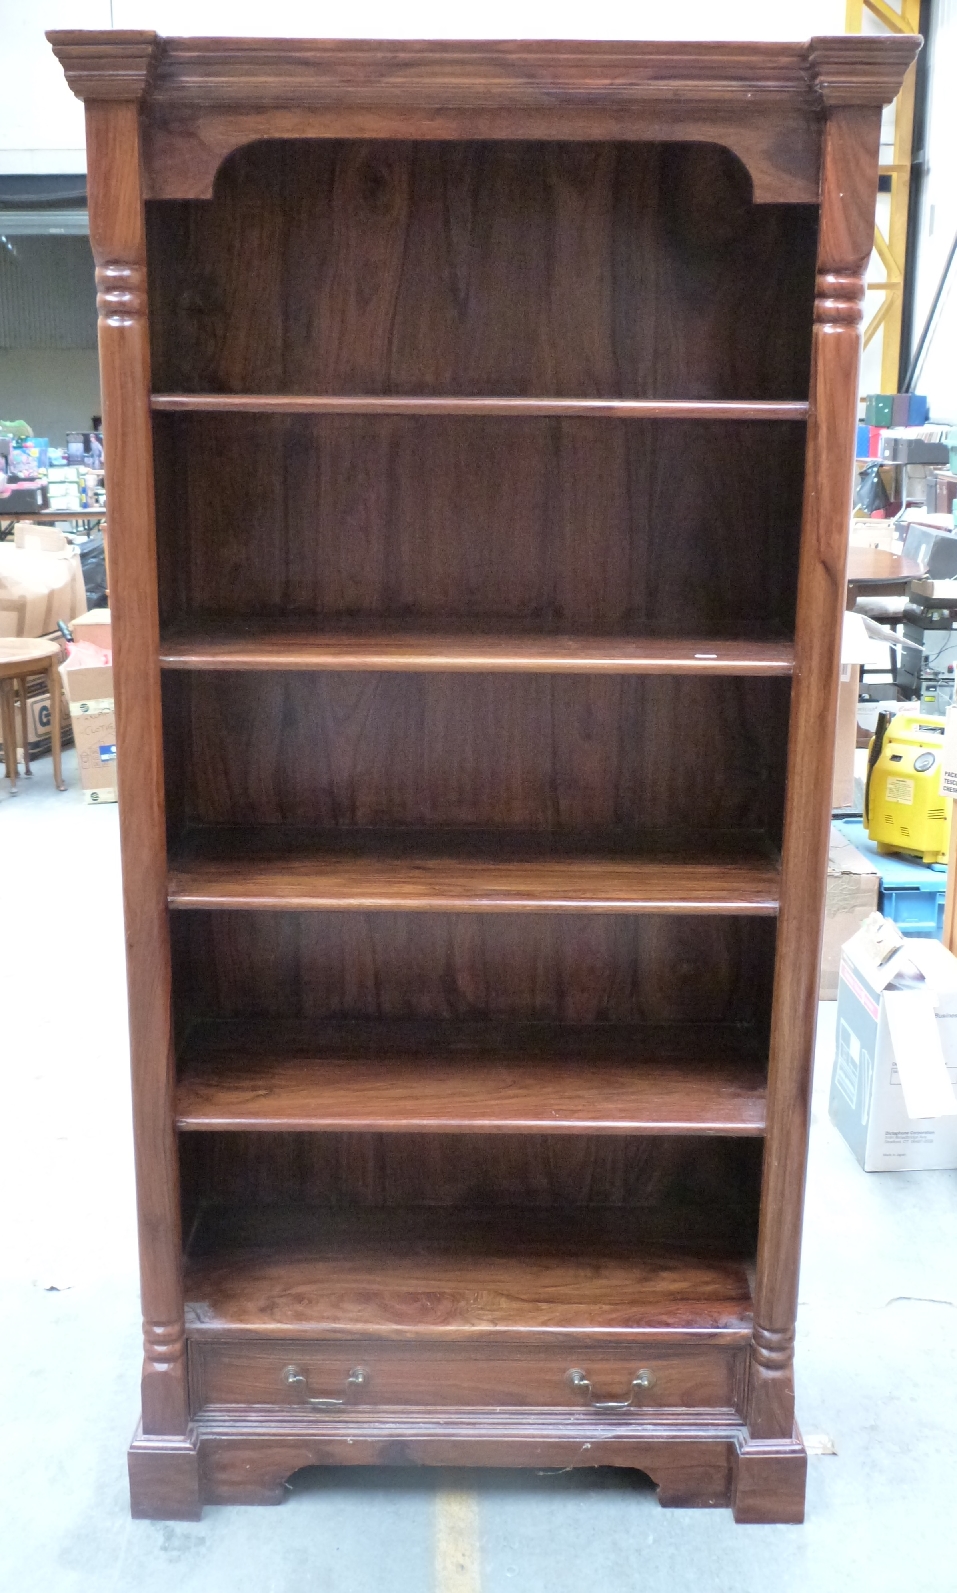 A hardwood bookcase with drawers below (H183 x W92 x D41cm)